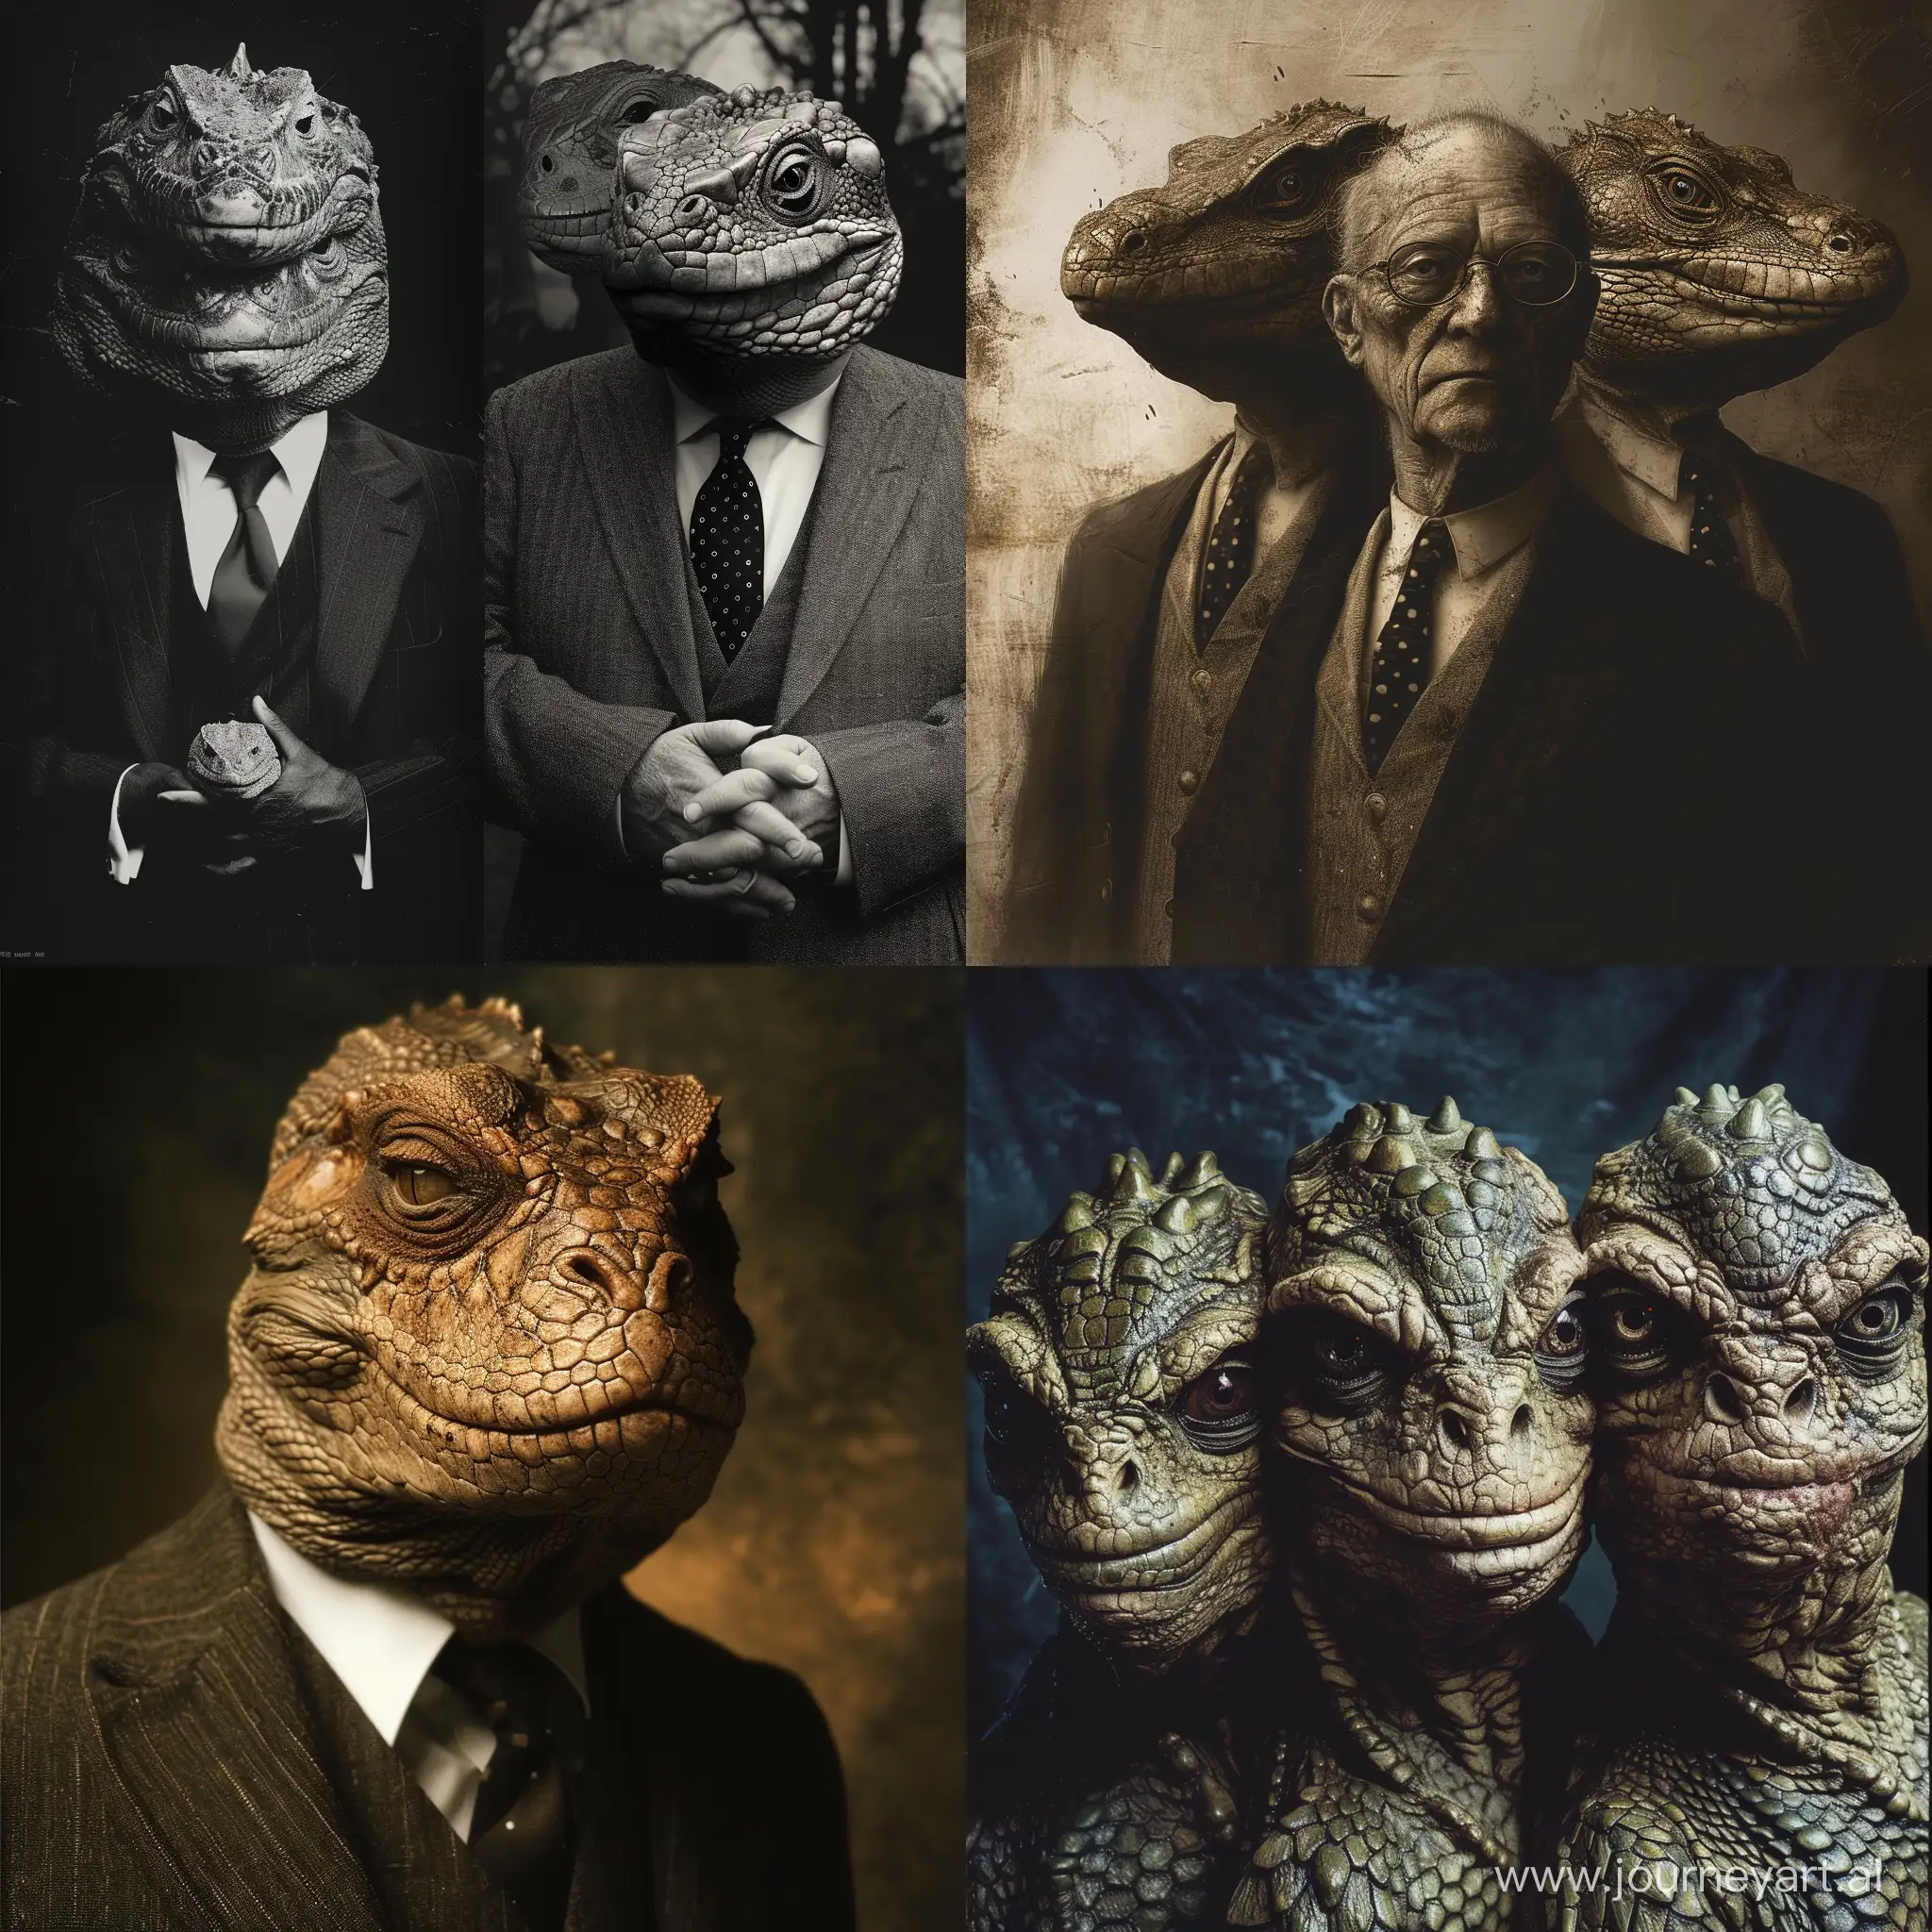 Secret-Lives-of-Famous-Reptilian-Influencers-Revealed-in-Striking-AI-Art